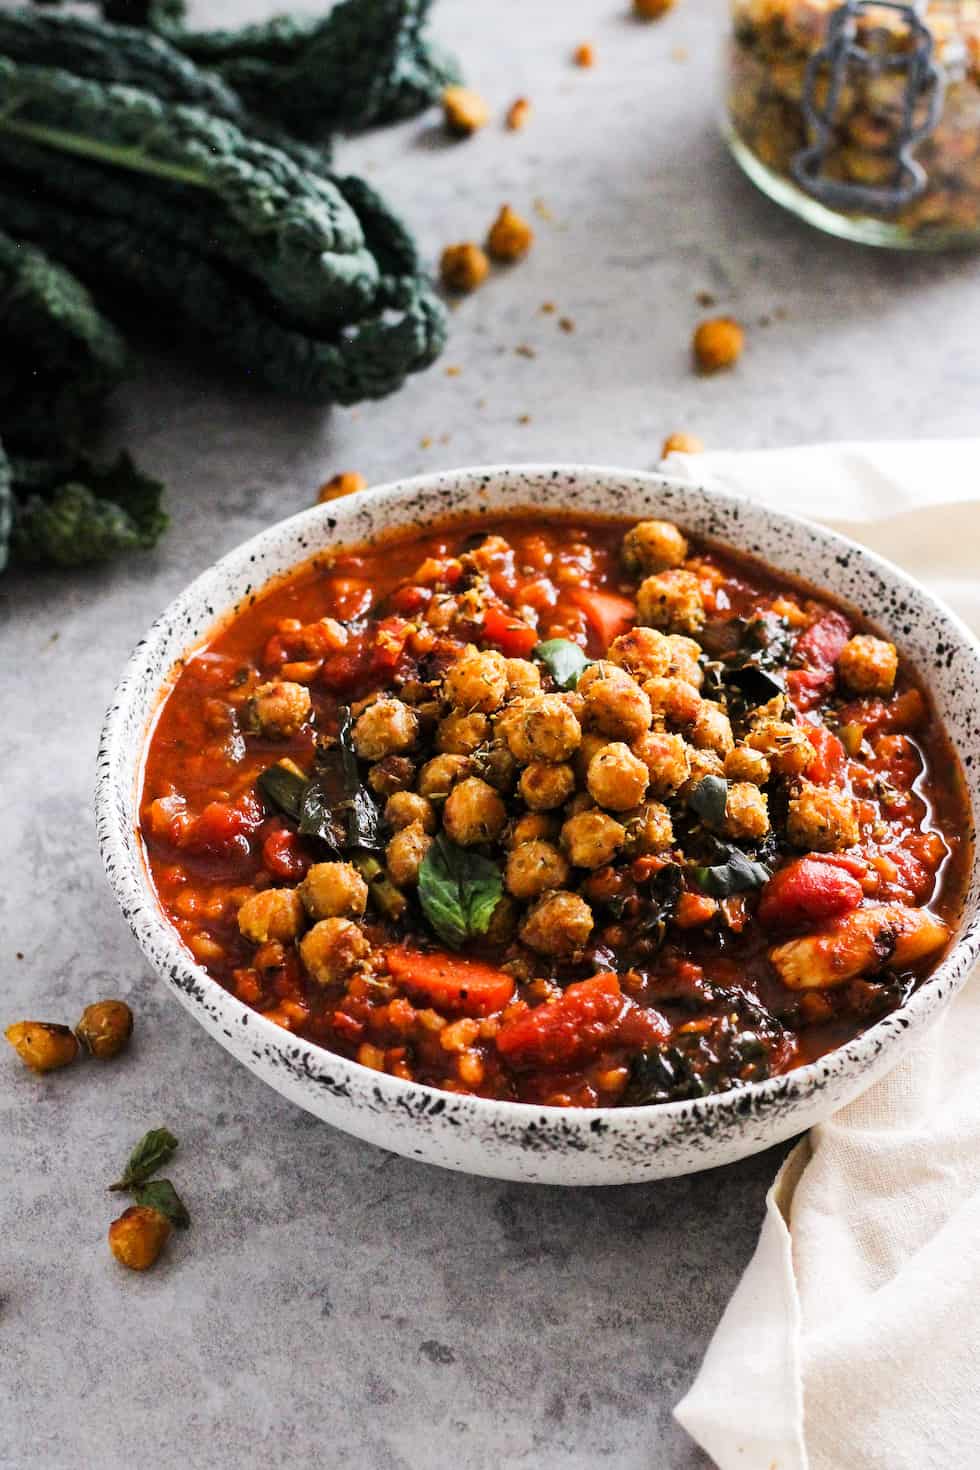 Tomato barley soup with roasted chickpeas in stone bowl with kale and mason jar or chickpeas in the background.